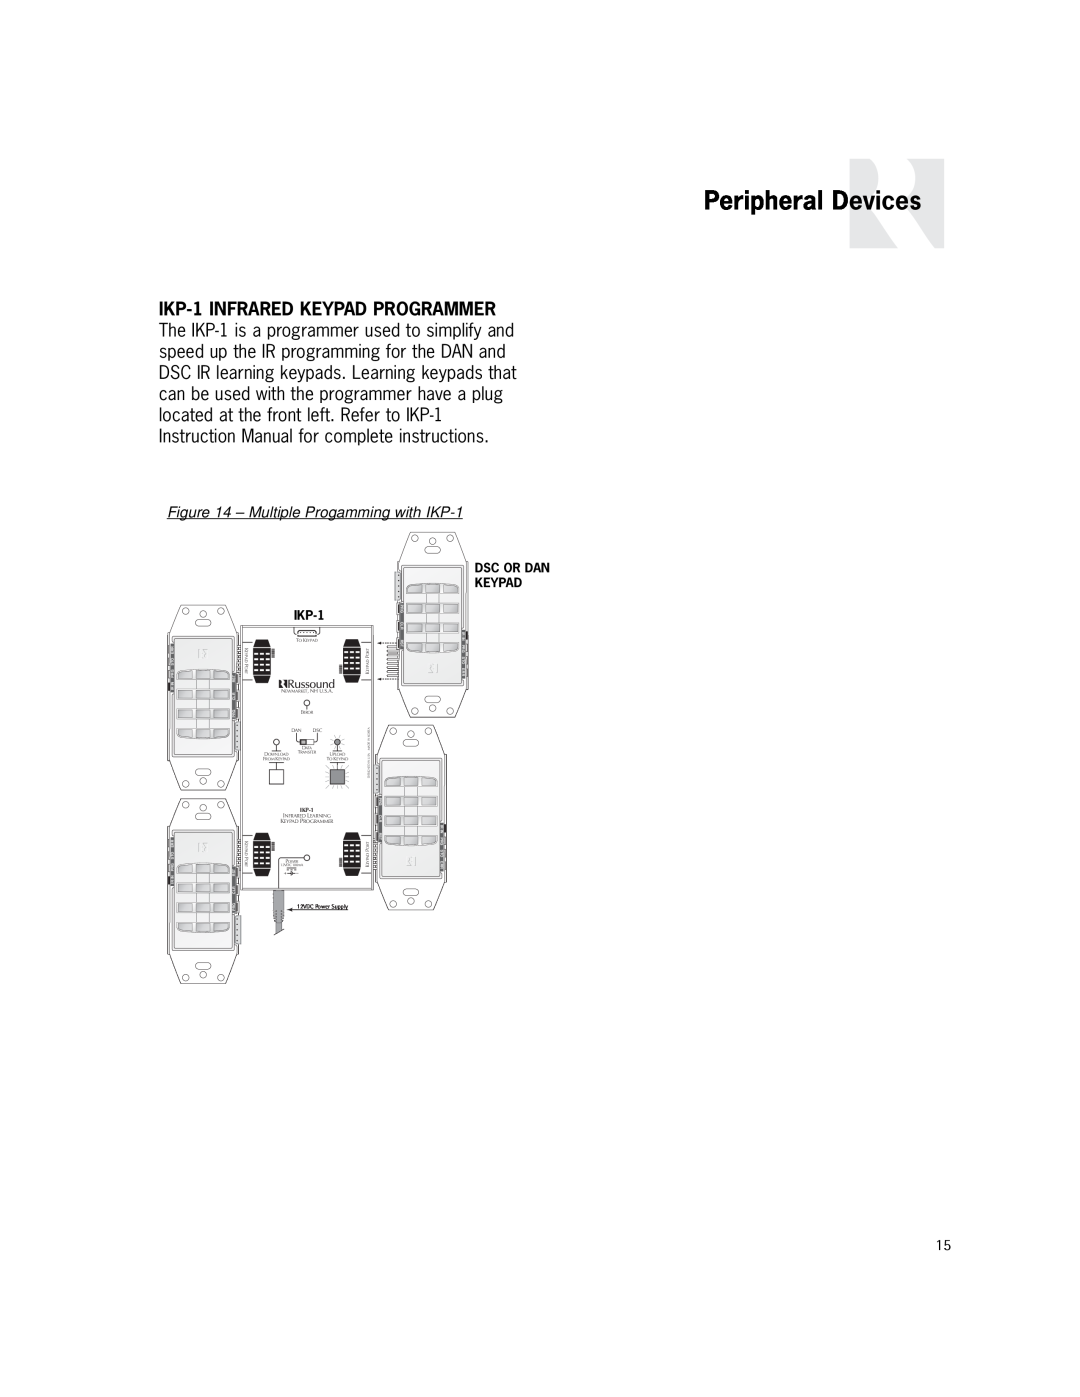 Russound PR-4Zi instruction manual Peripheral Devices, Multiple Progamming with IKP-1, Dsc Or Dan Keypad 